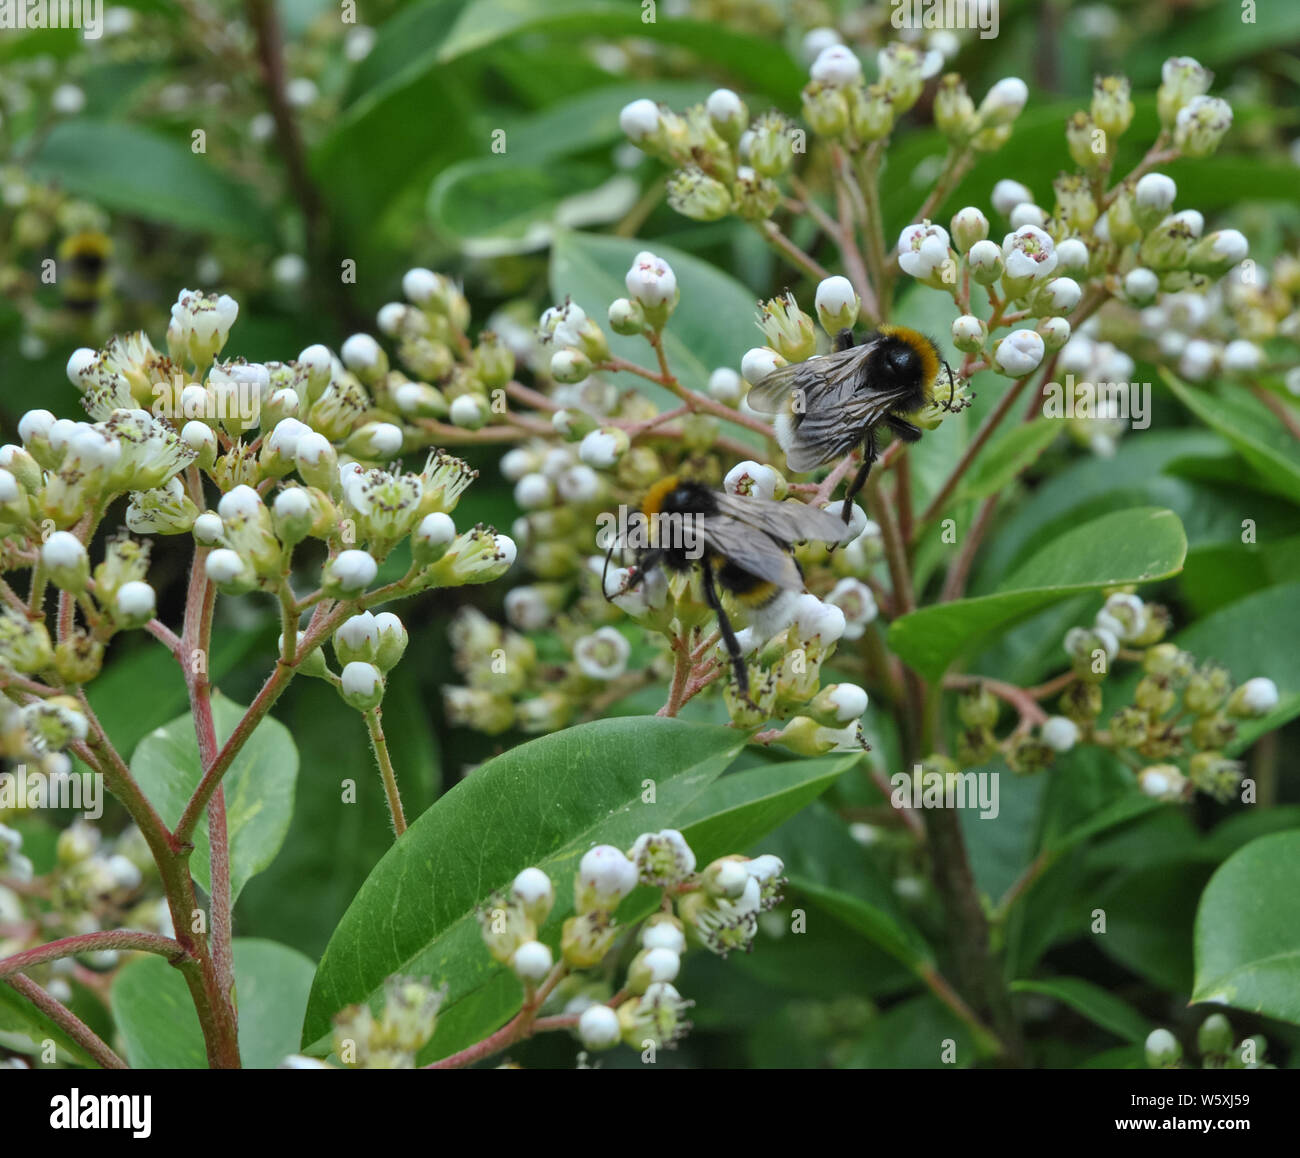 Two Bumble Bees feeding on flowers Stock Photo